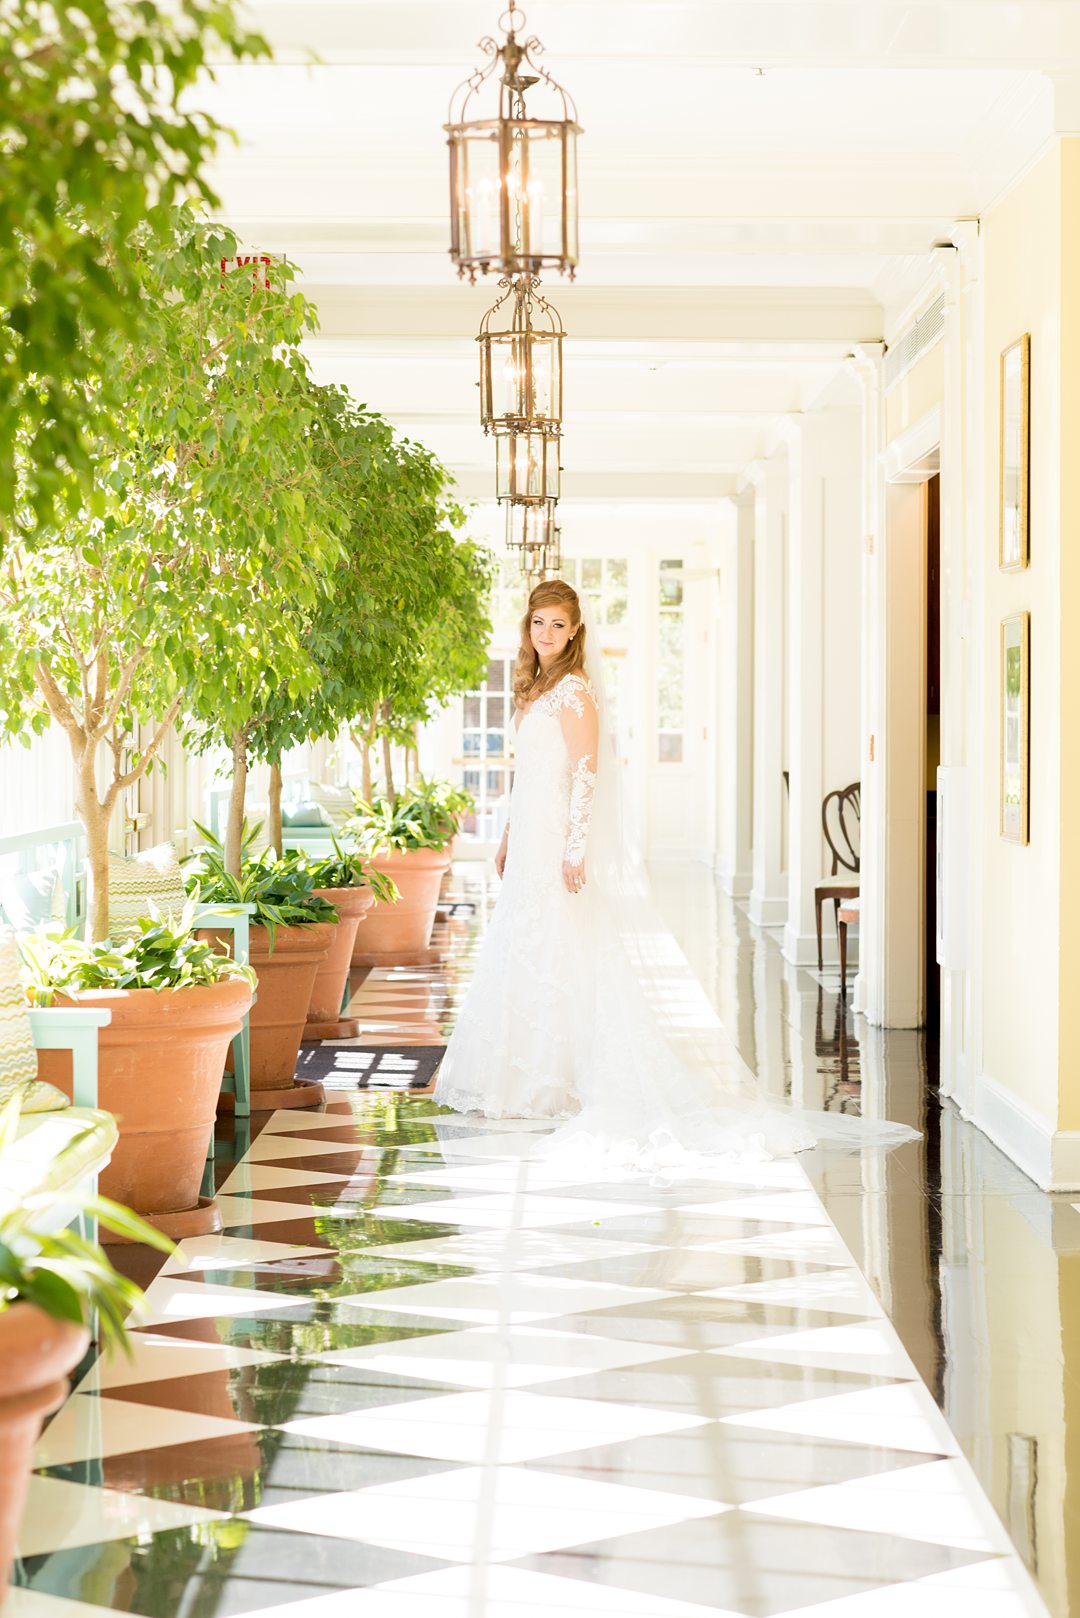 Photo of a bride at The Carolina Inn by Mikkel Paige Photography, in Chapel Hill, North Carolina.